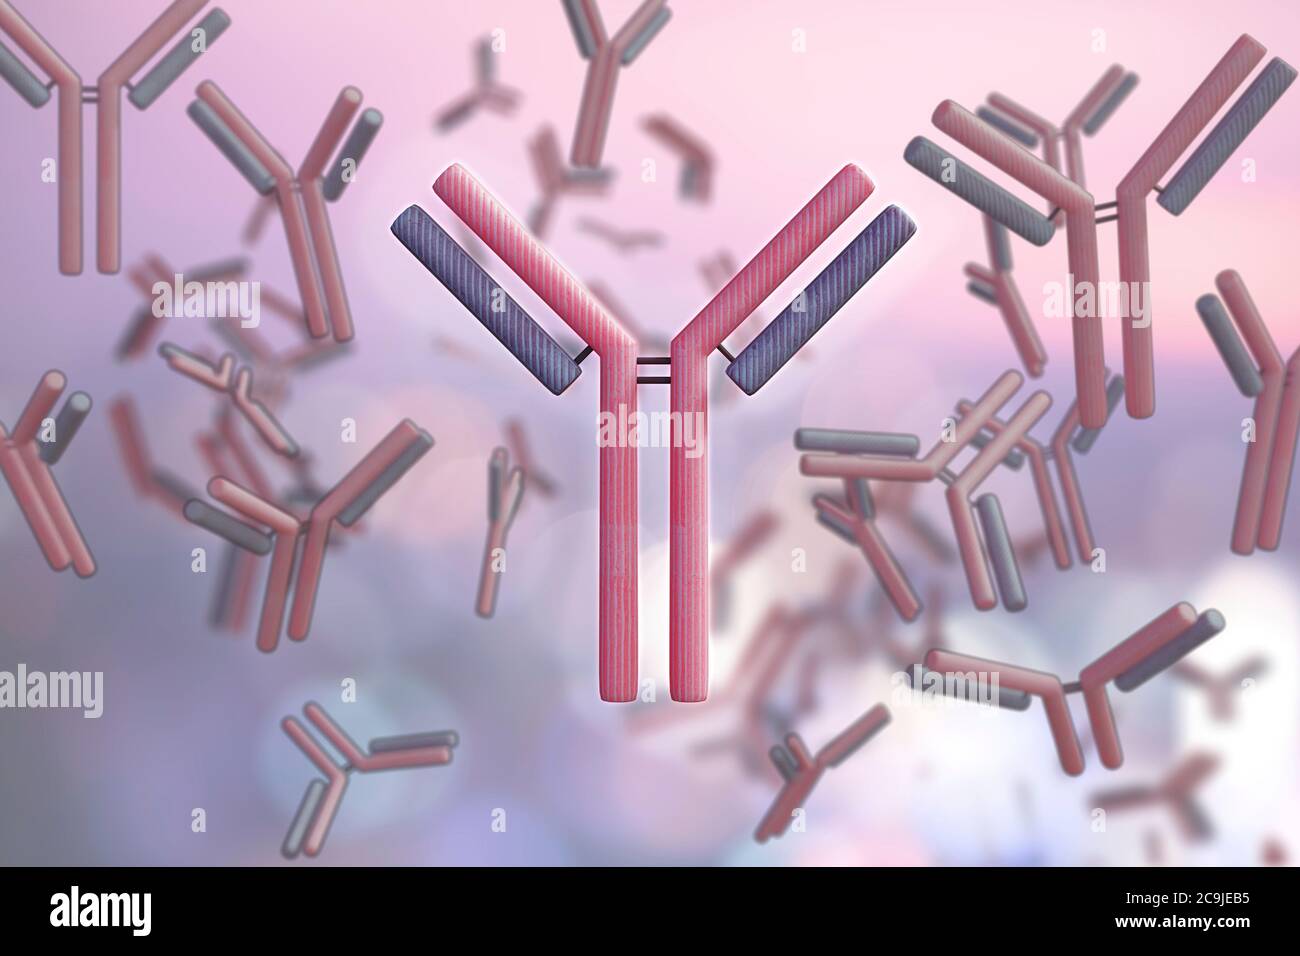 Computer illustration of antibodies, showing the heavy chain (red) and the light chain (blue). Stock Photo